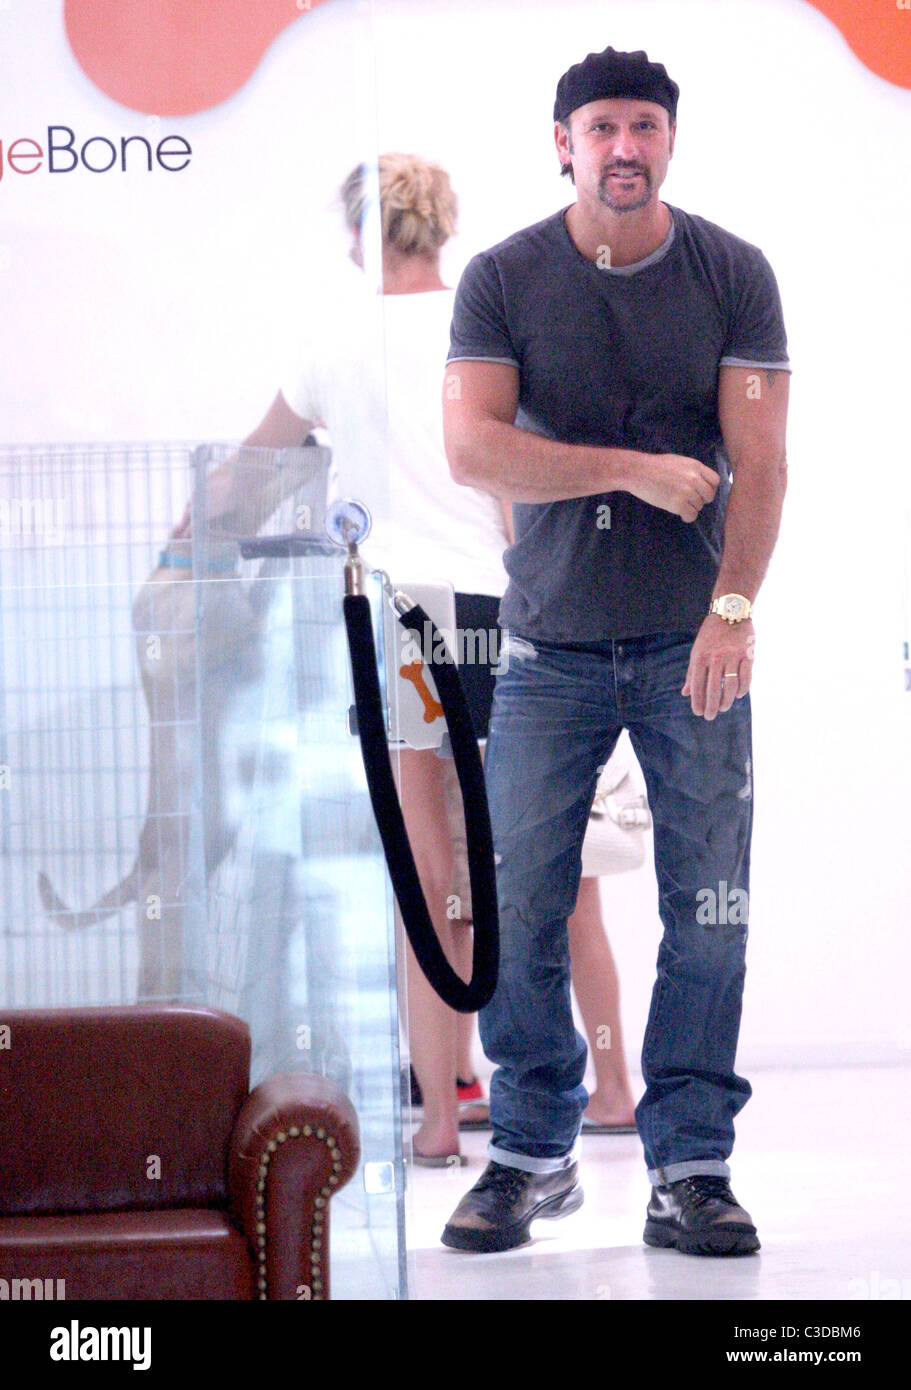 Tim McGraw inside OrangeBone pet store with his children after looking at puppies Los Angeles, California - 22.07.09 Agent 47/ Stock Photo